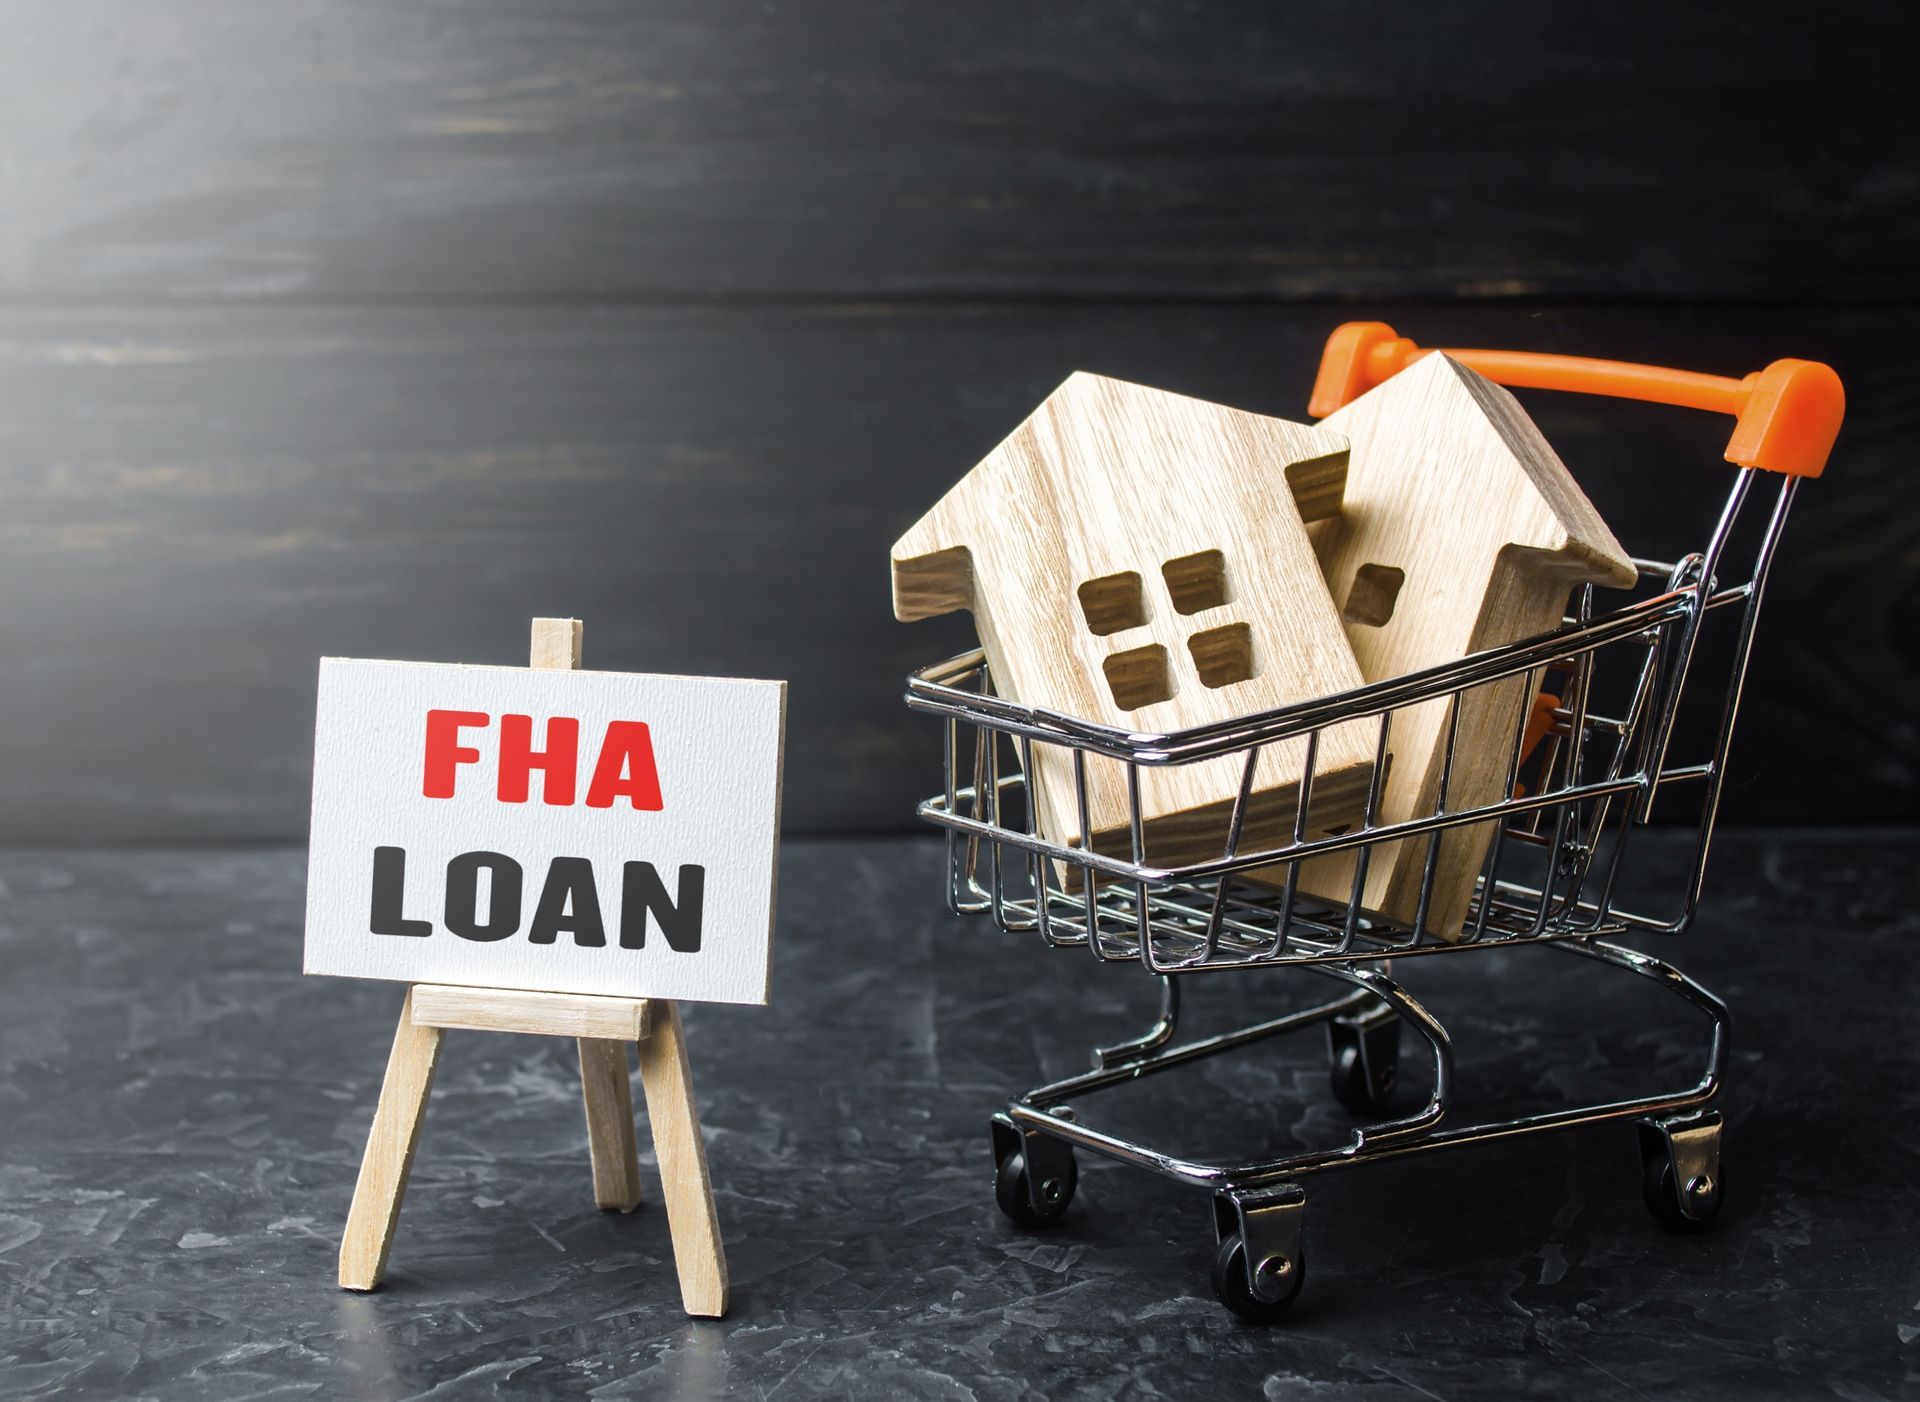 A shopping cart filled with wooden houses next to a sign that says FHA loan.